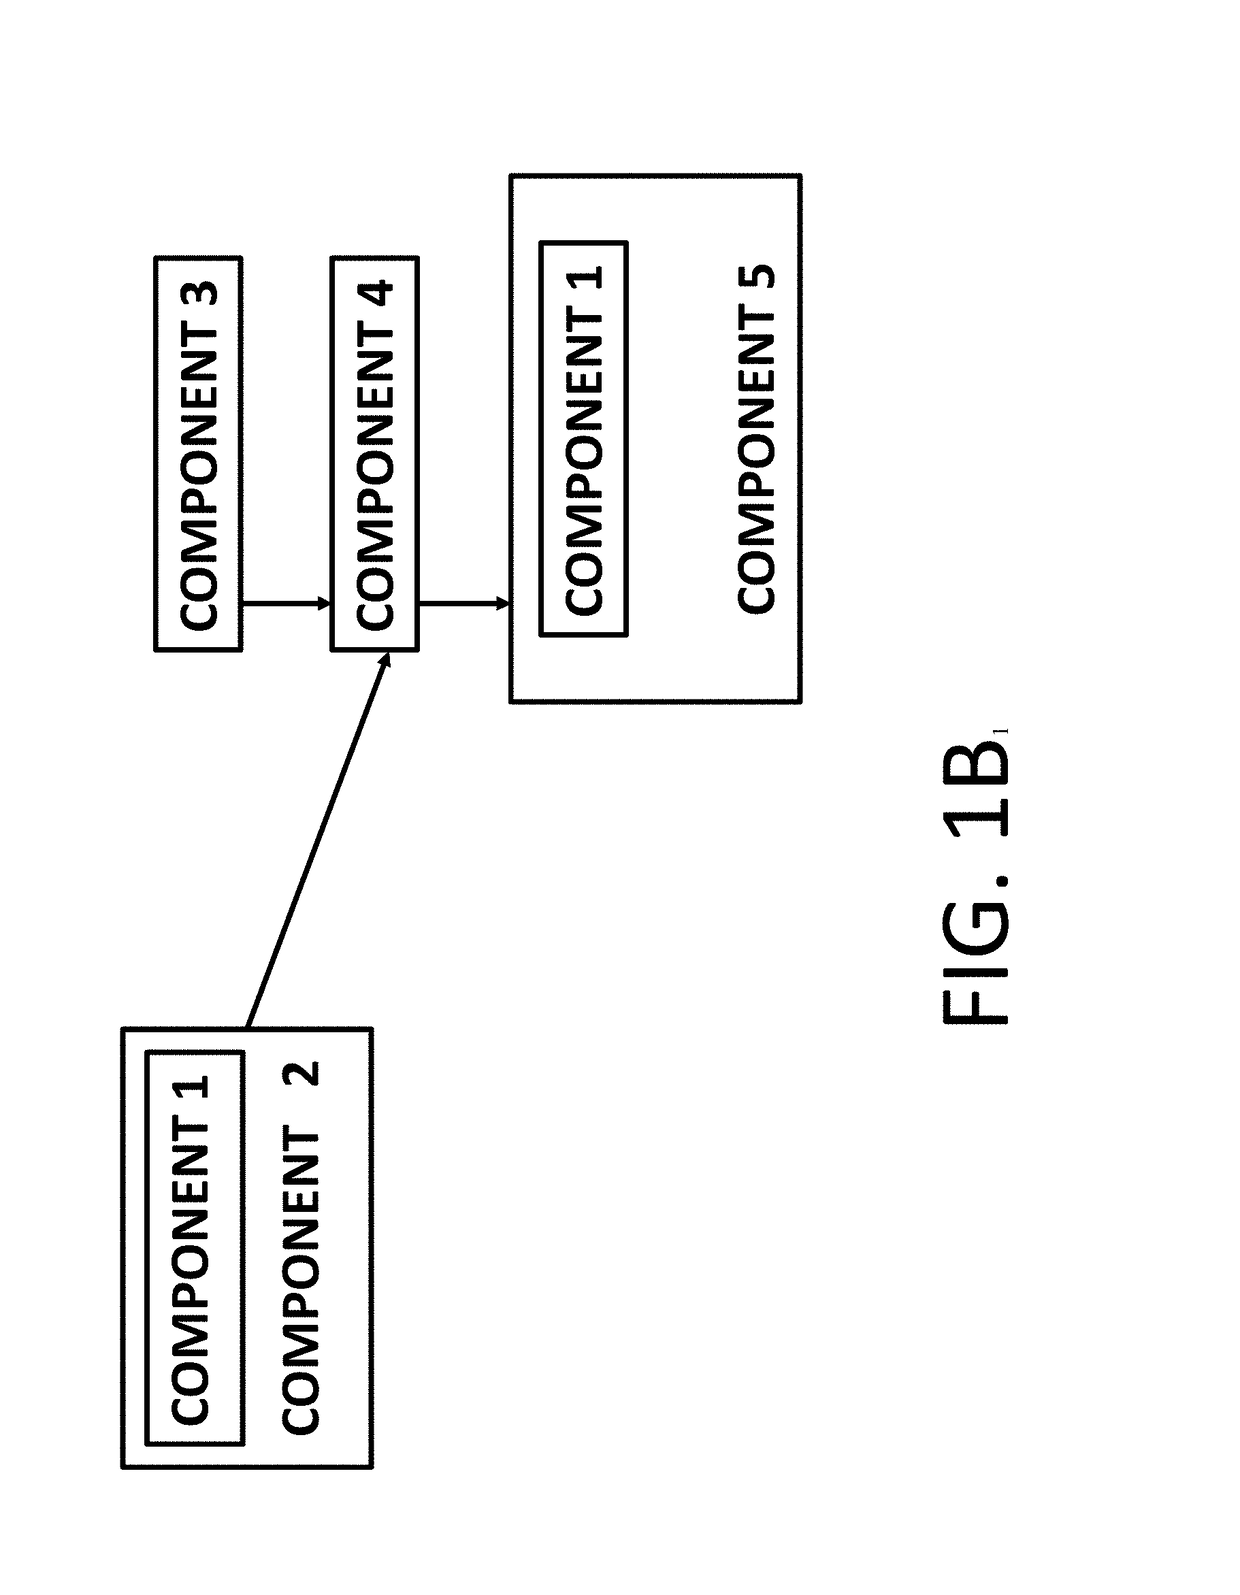 Method and system for identification of metabolites